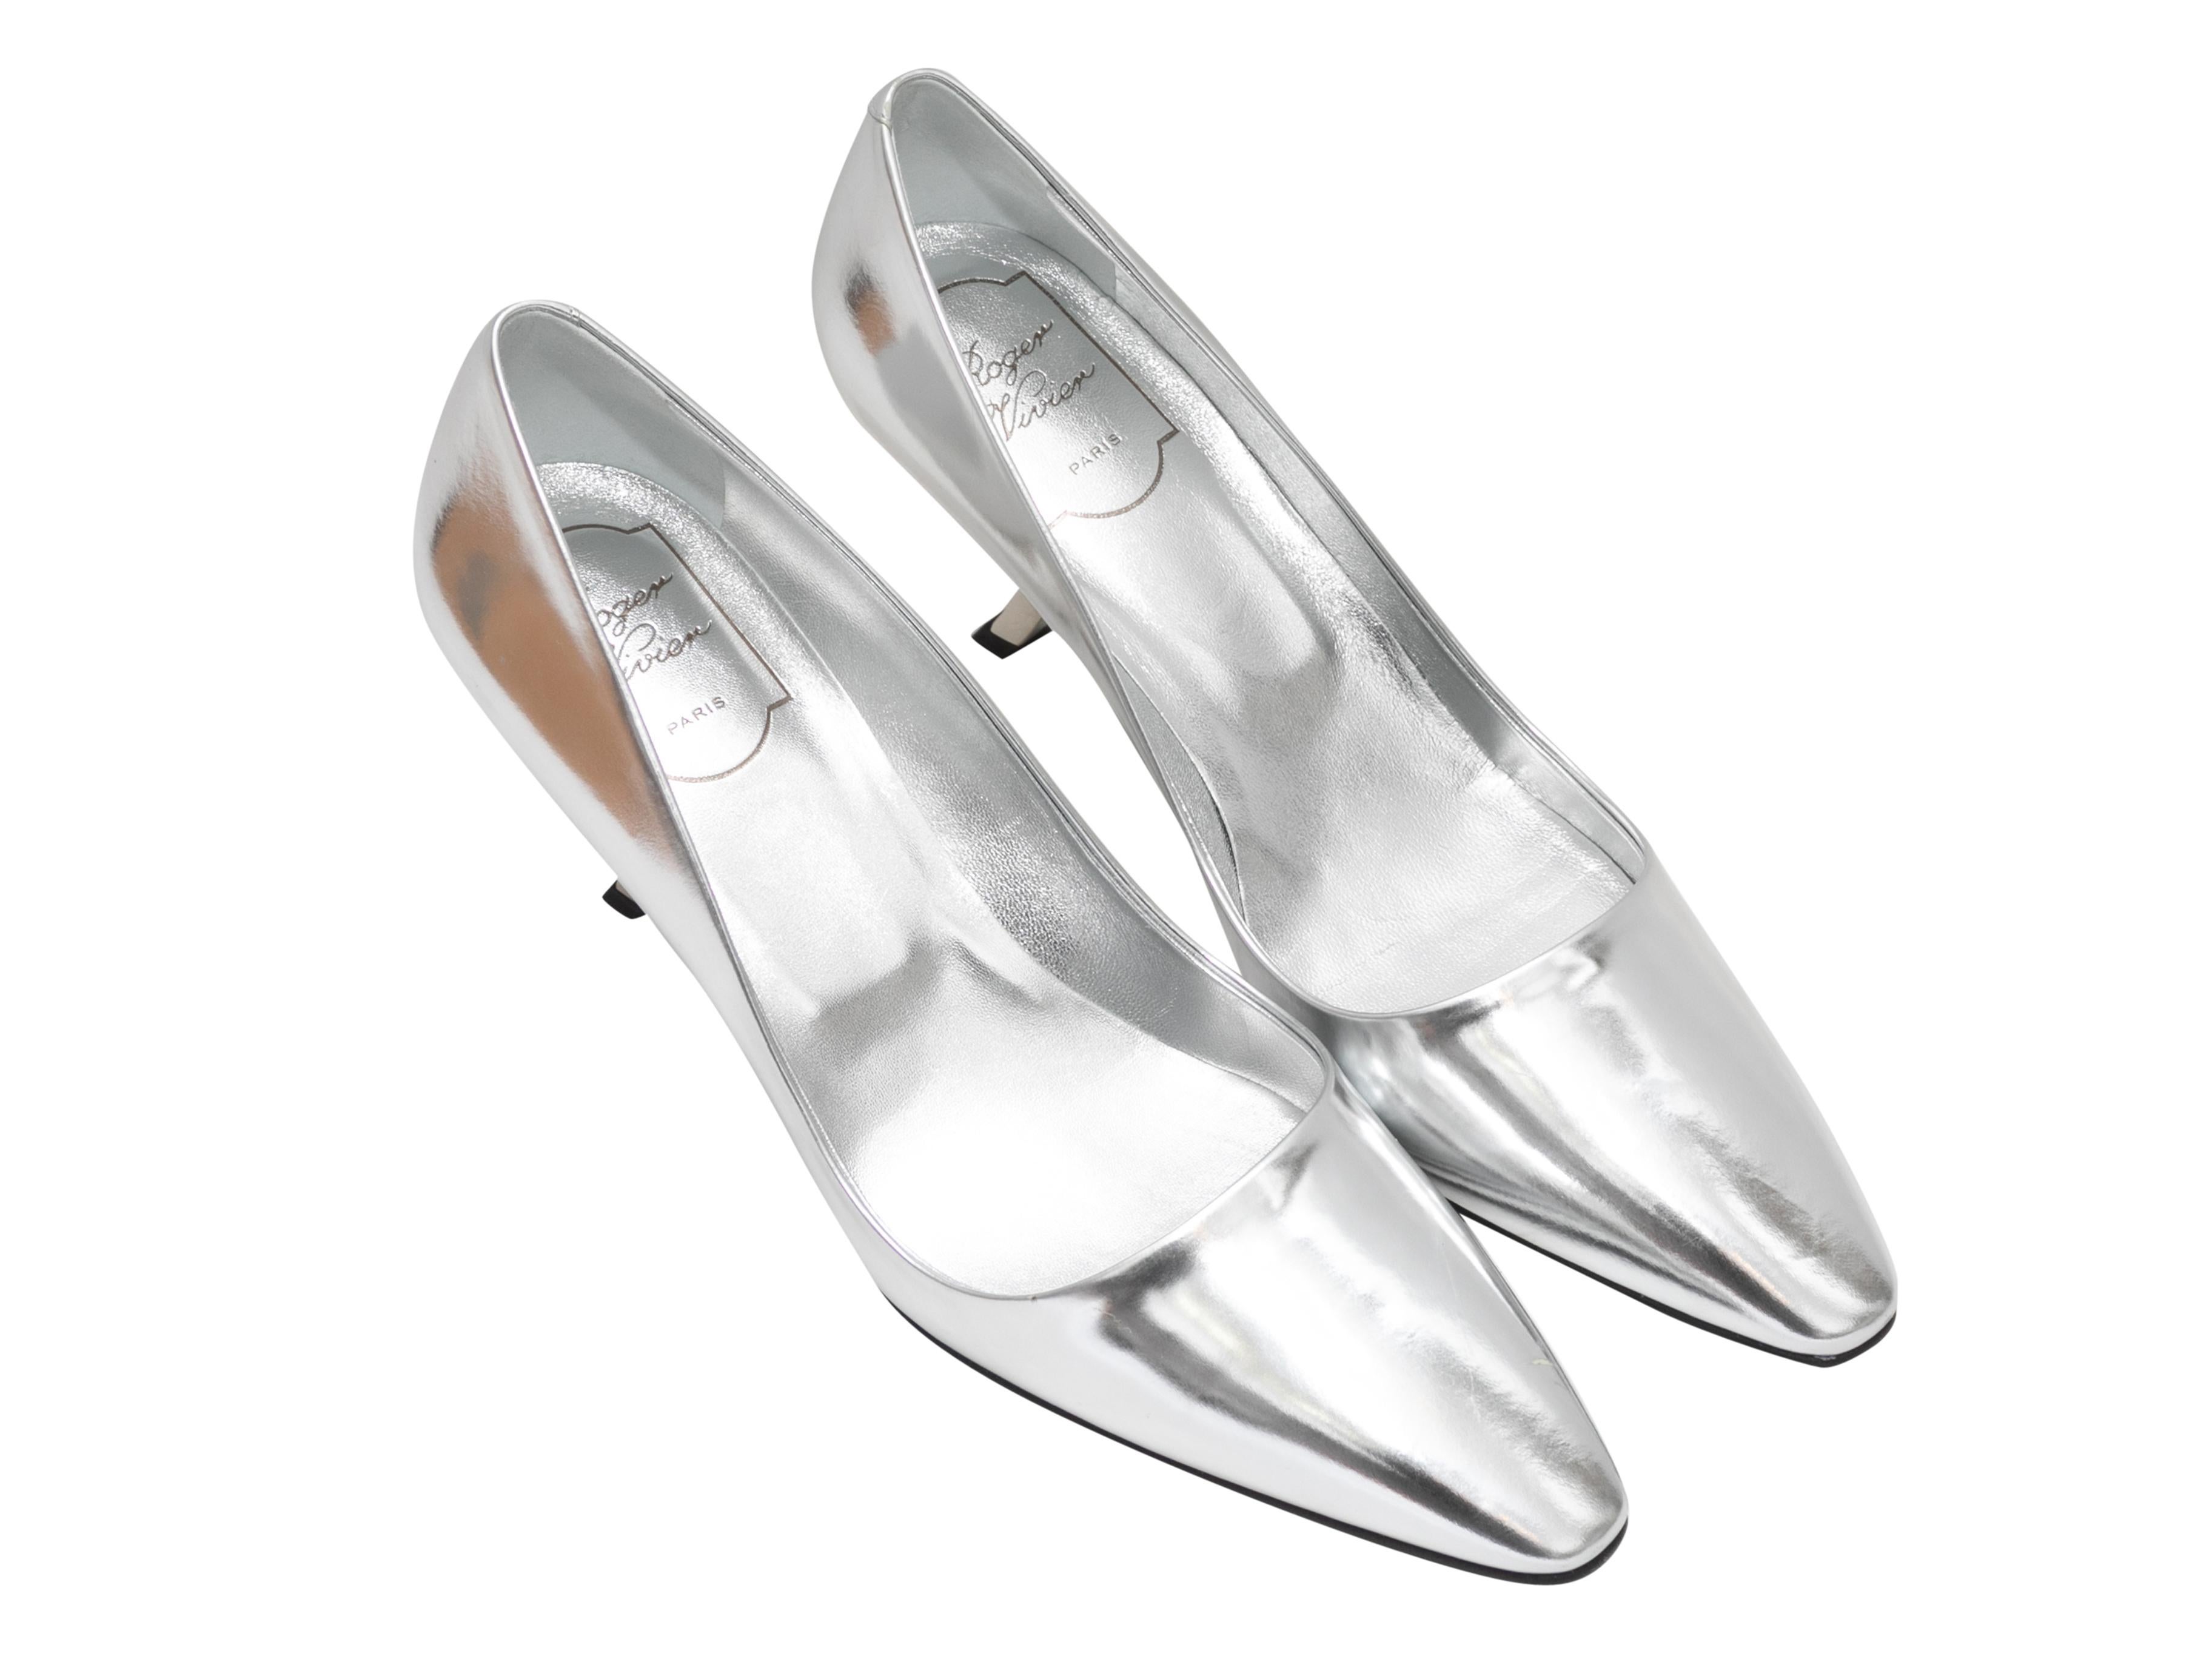 Silver metallic patent leather pointed-toe pumps by Roger Vivier. Comma heels. 3